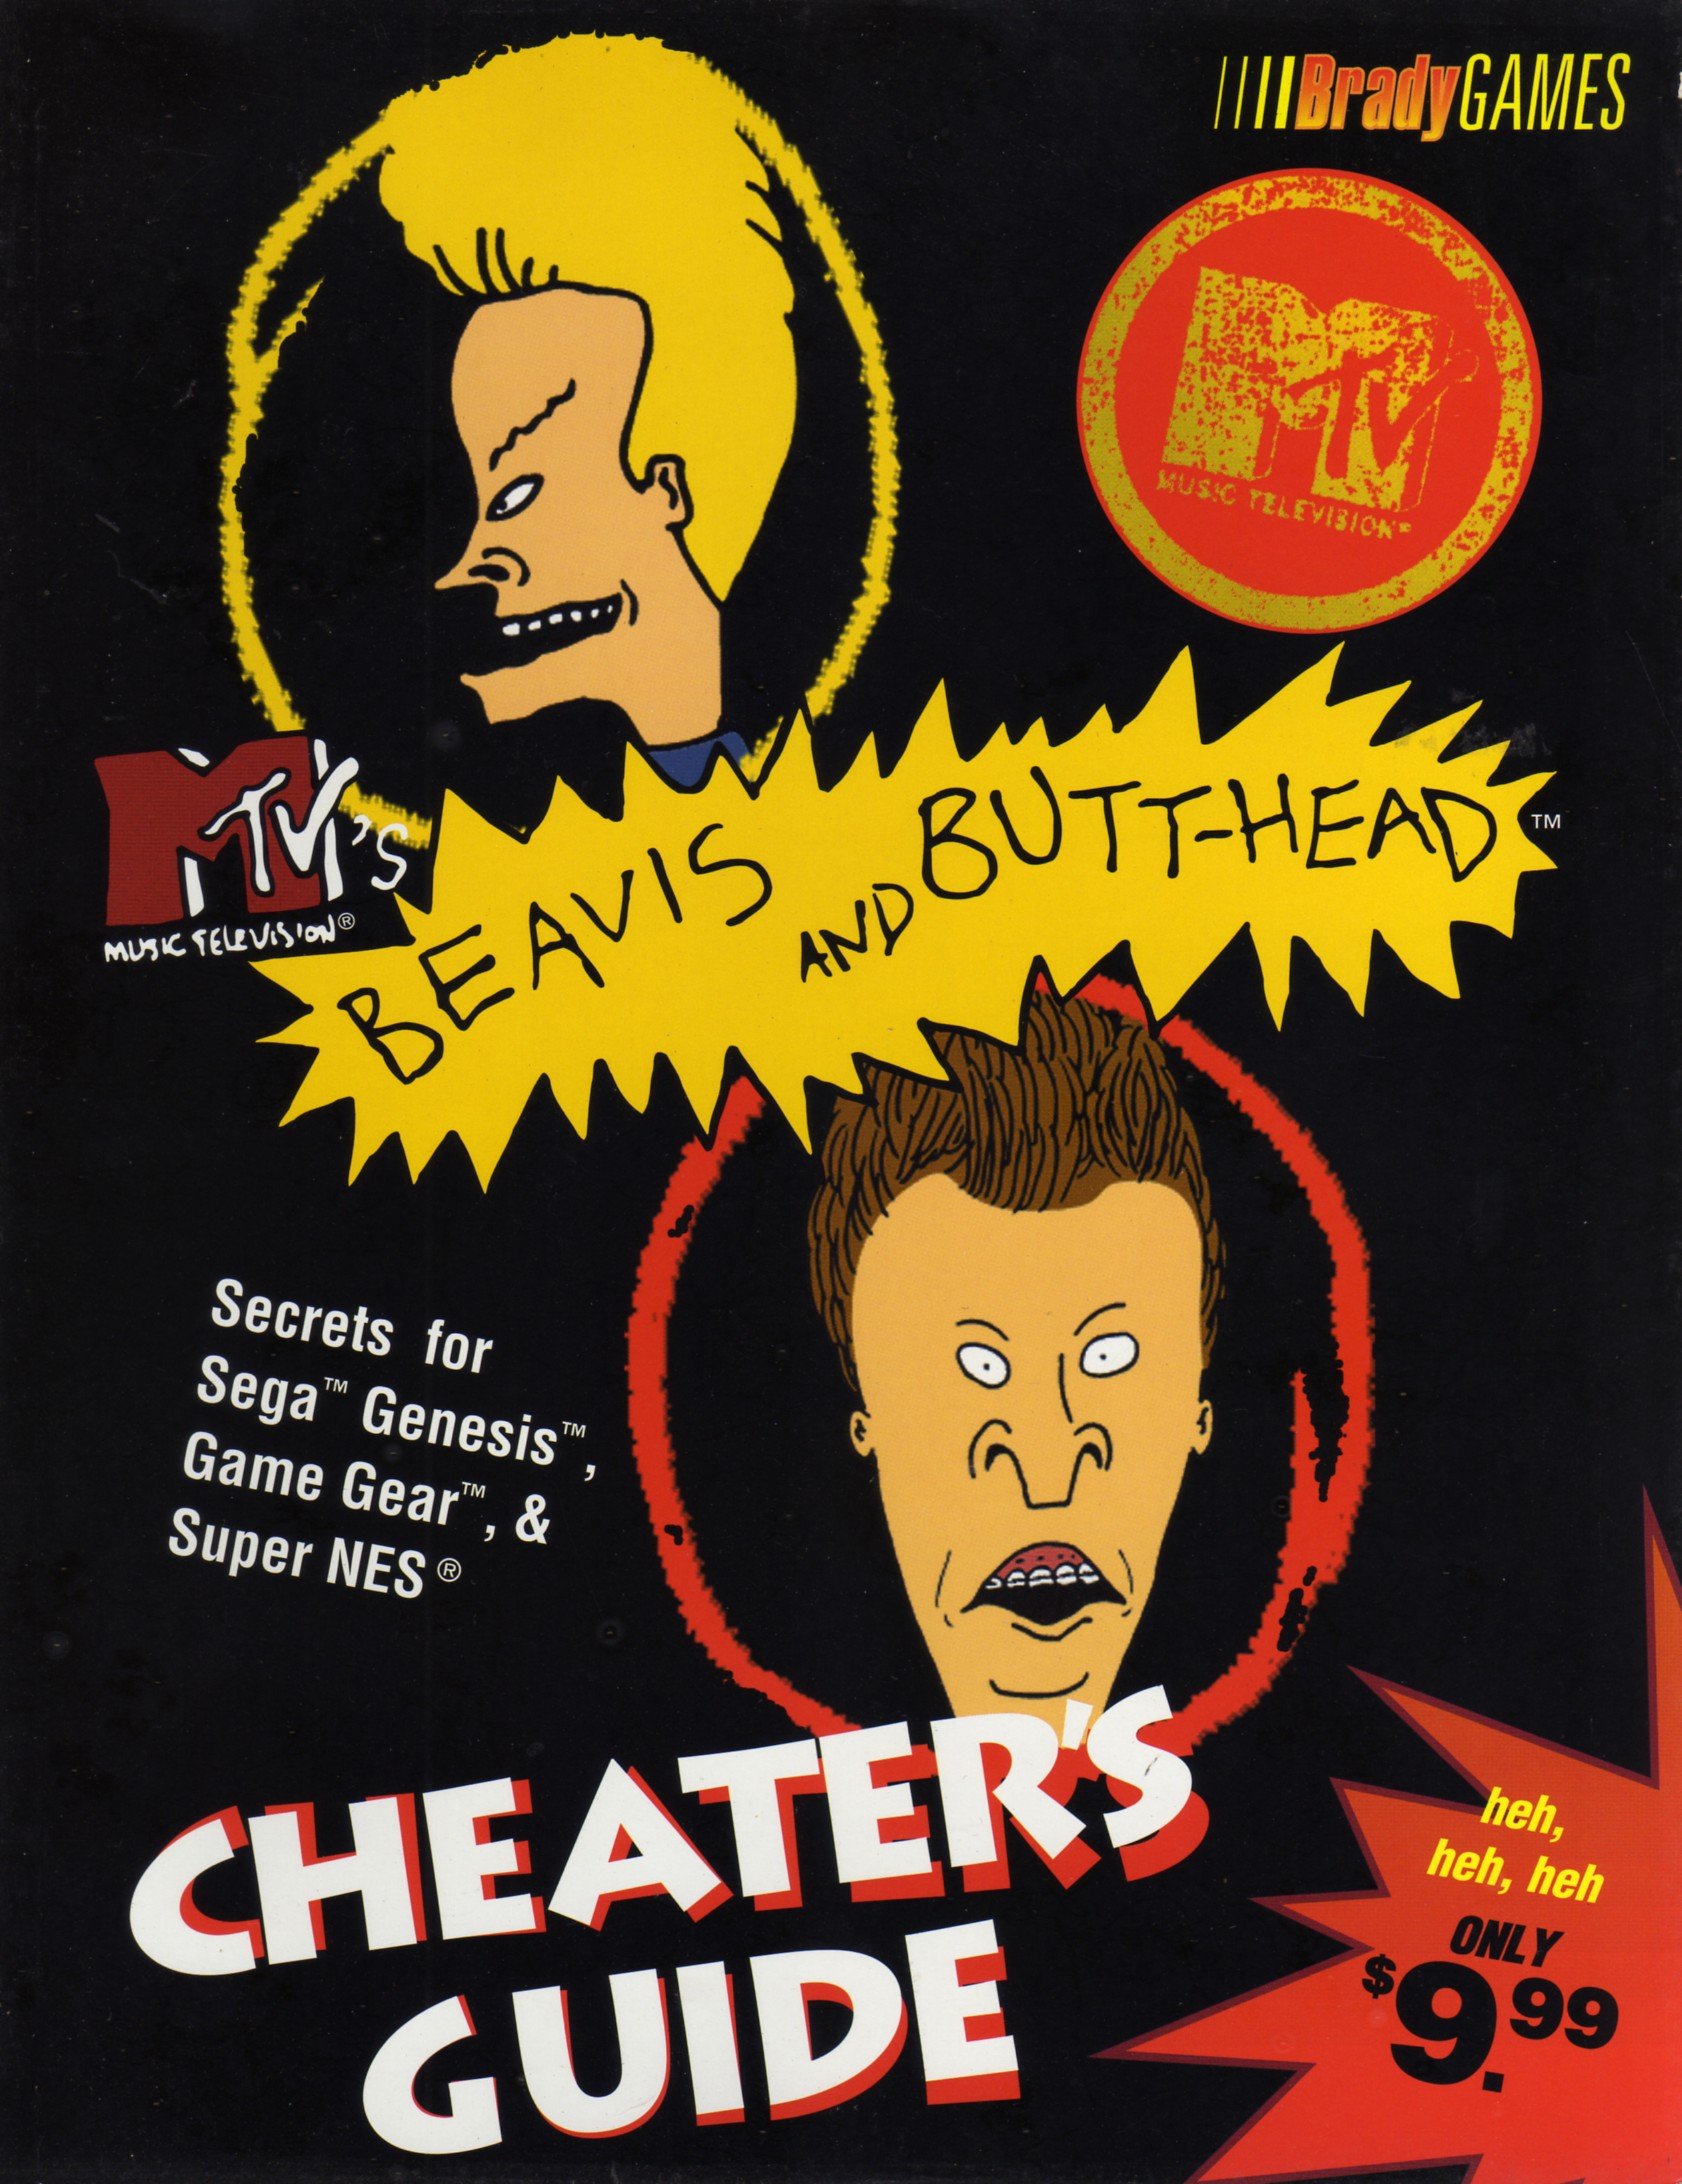 Beavis and Butt-Head Cheater's Guide